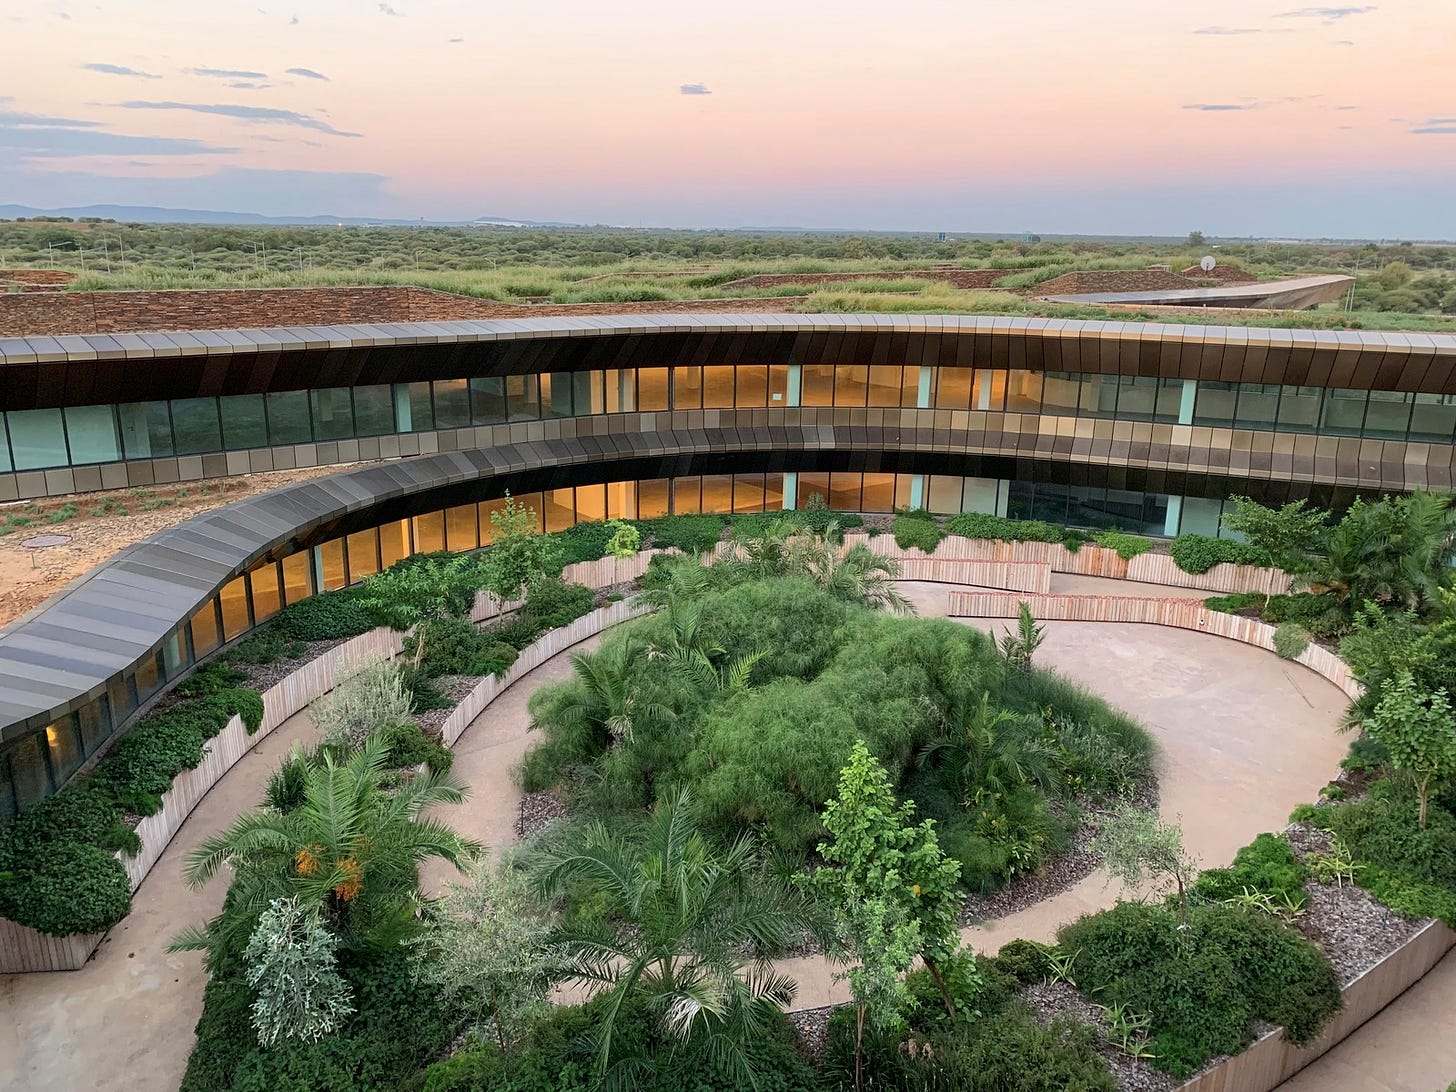 The Icon Building, located outside Botswana’s capital city of Gabarone, boasts Africa’s largest green roof. It’s designed to be the anchor for a campus of the state-run&nbsp;Botswana Innovation Hub.